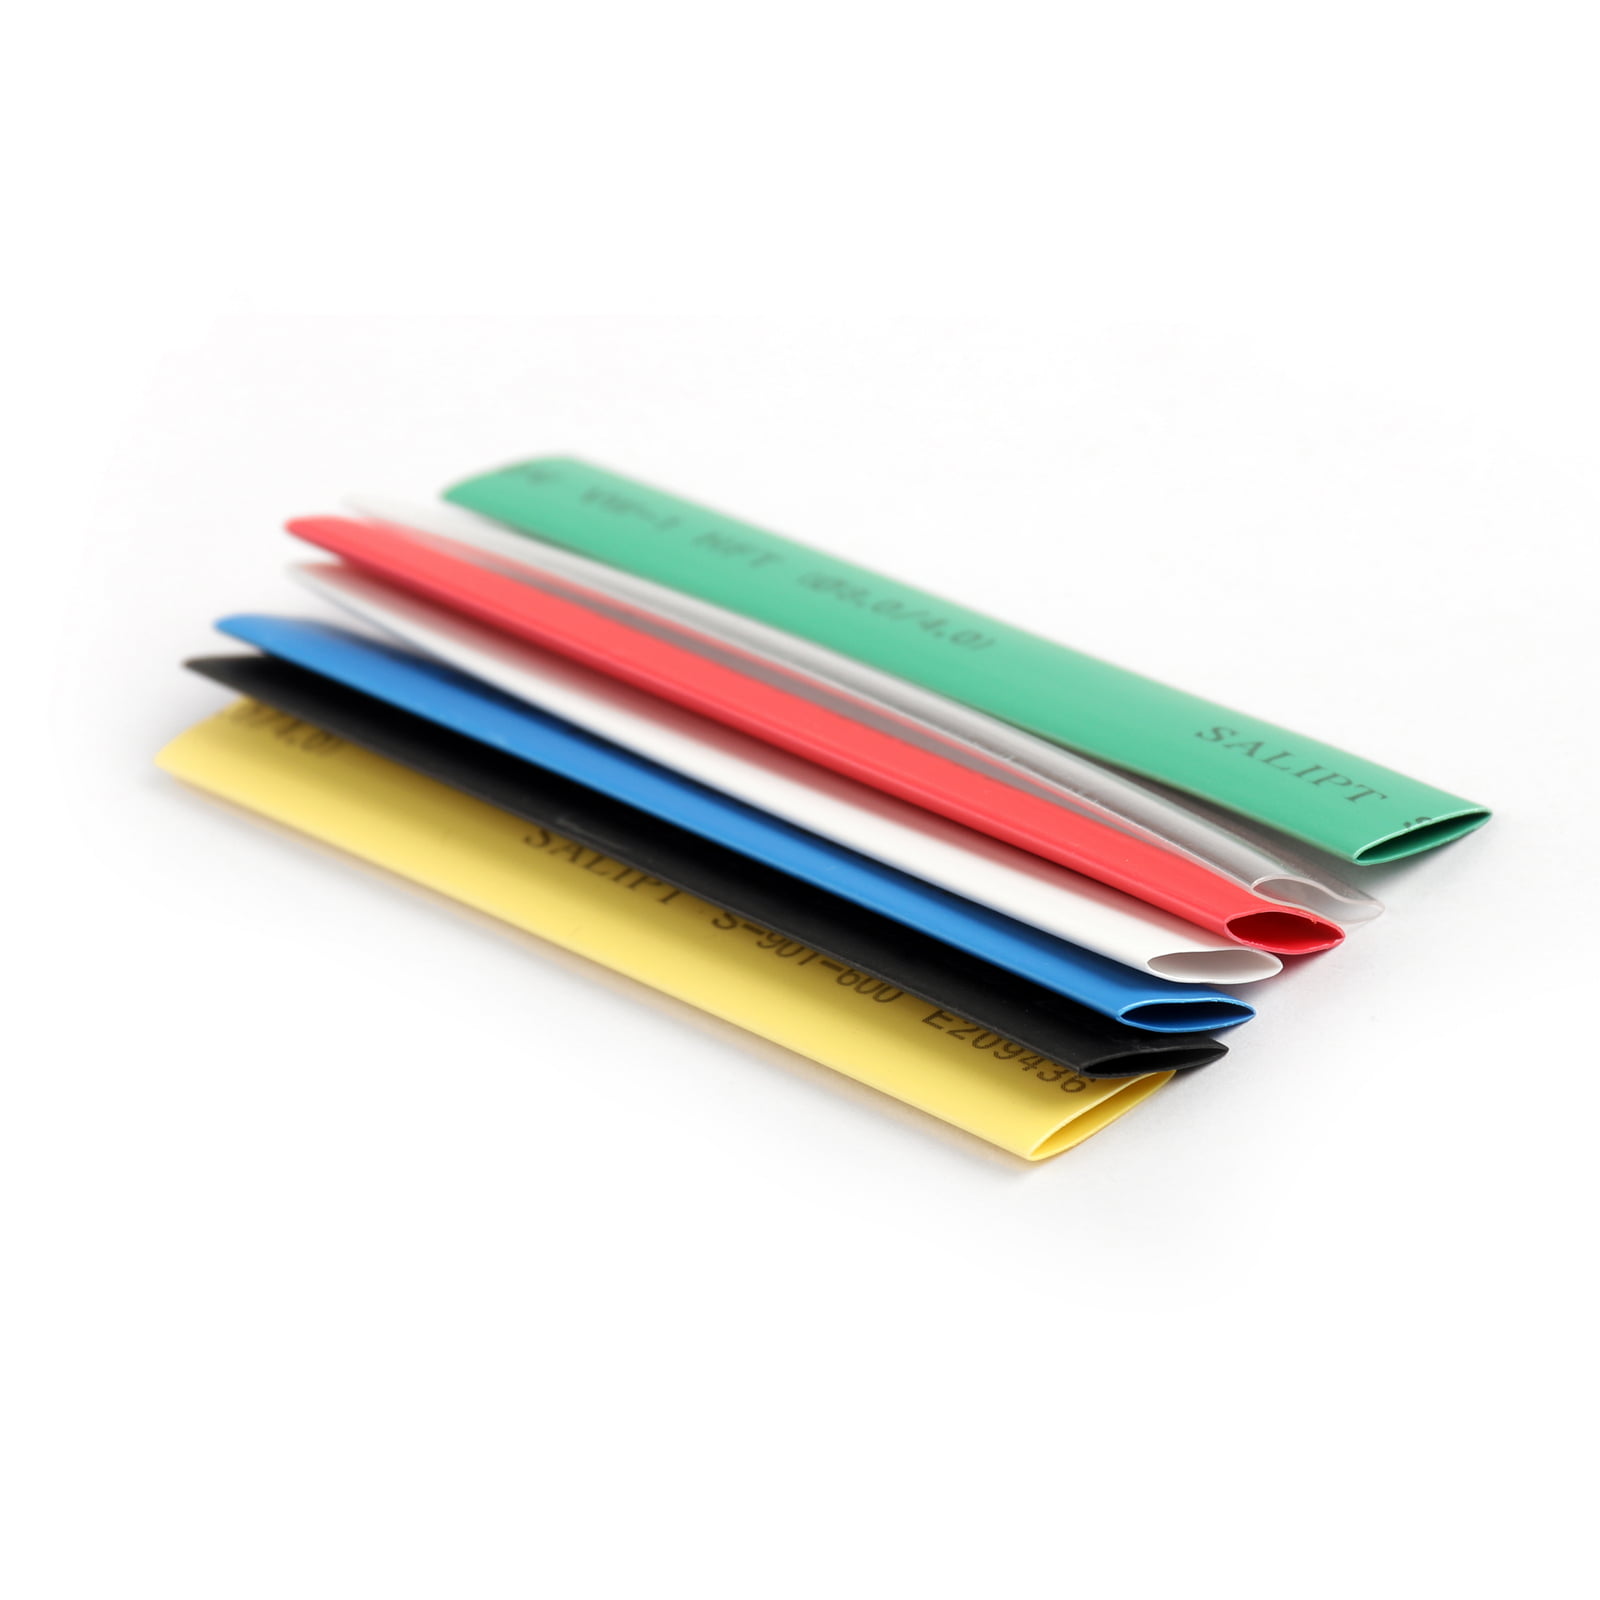 Details about   21Pcs 7 Colors 8mm Assorted 2:1 Heat Shrink Tubing Sleeving Wrap Cable 90mm 